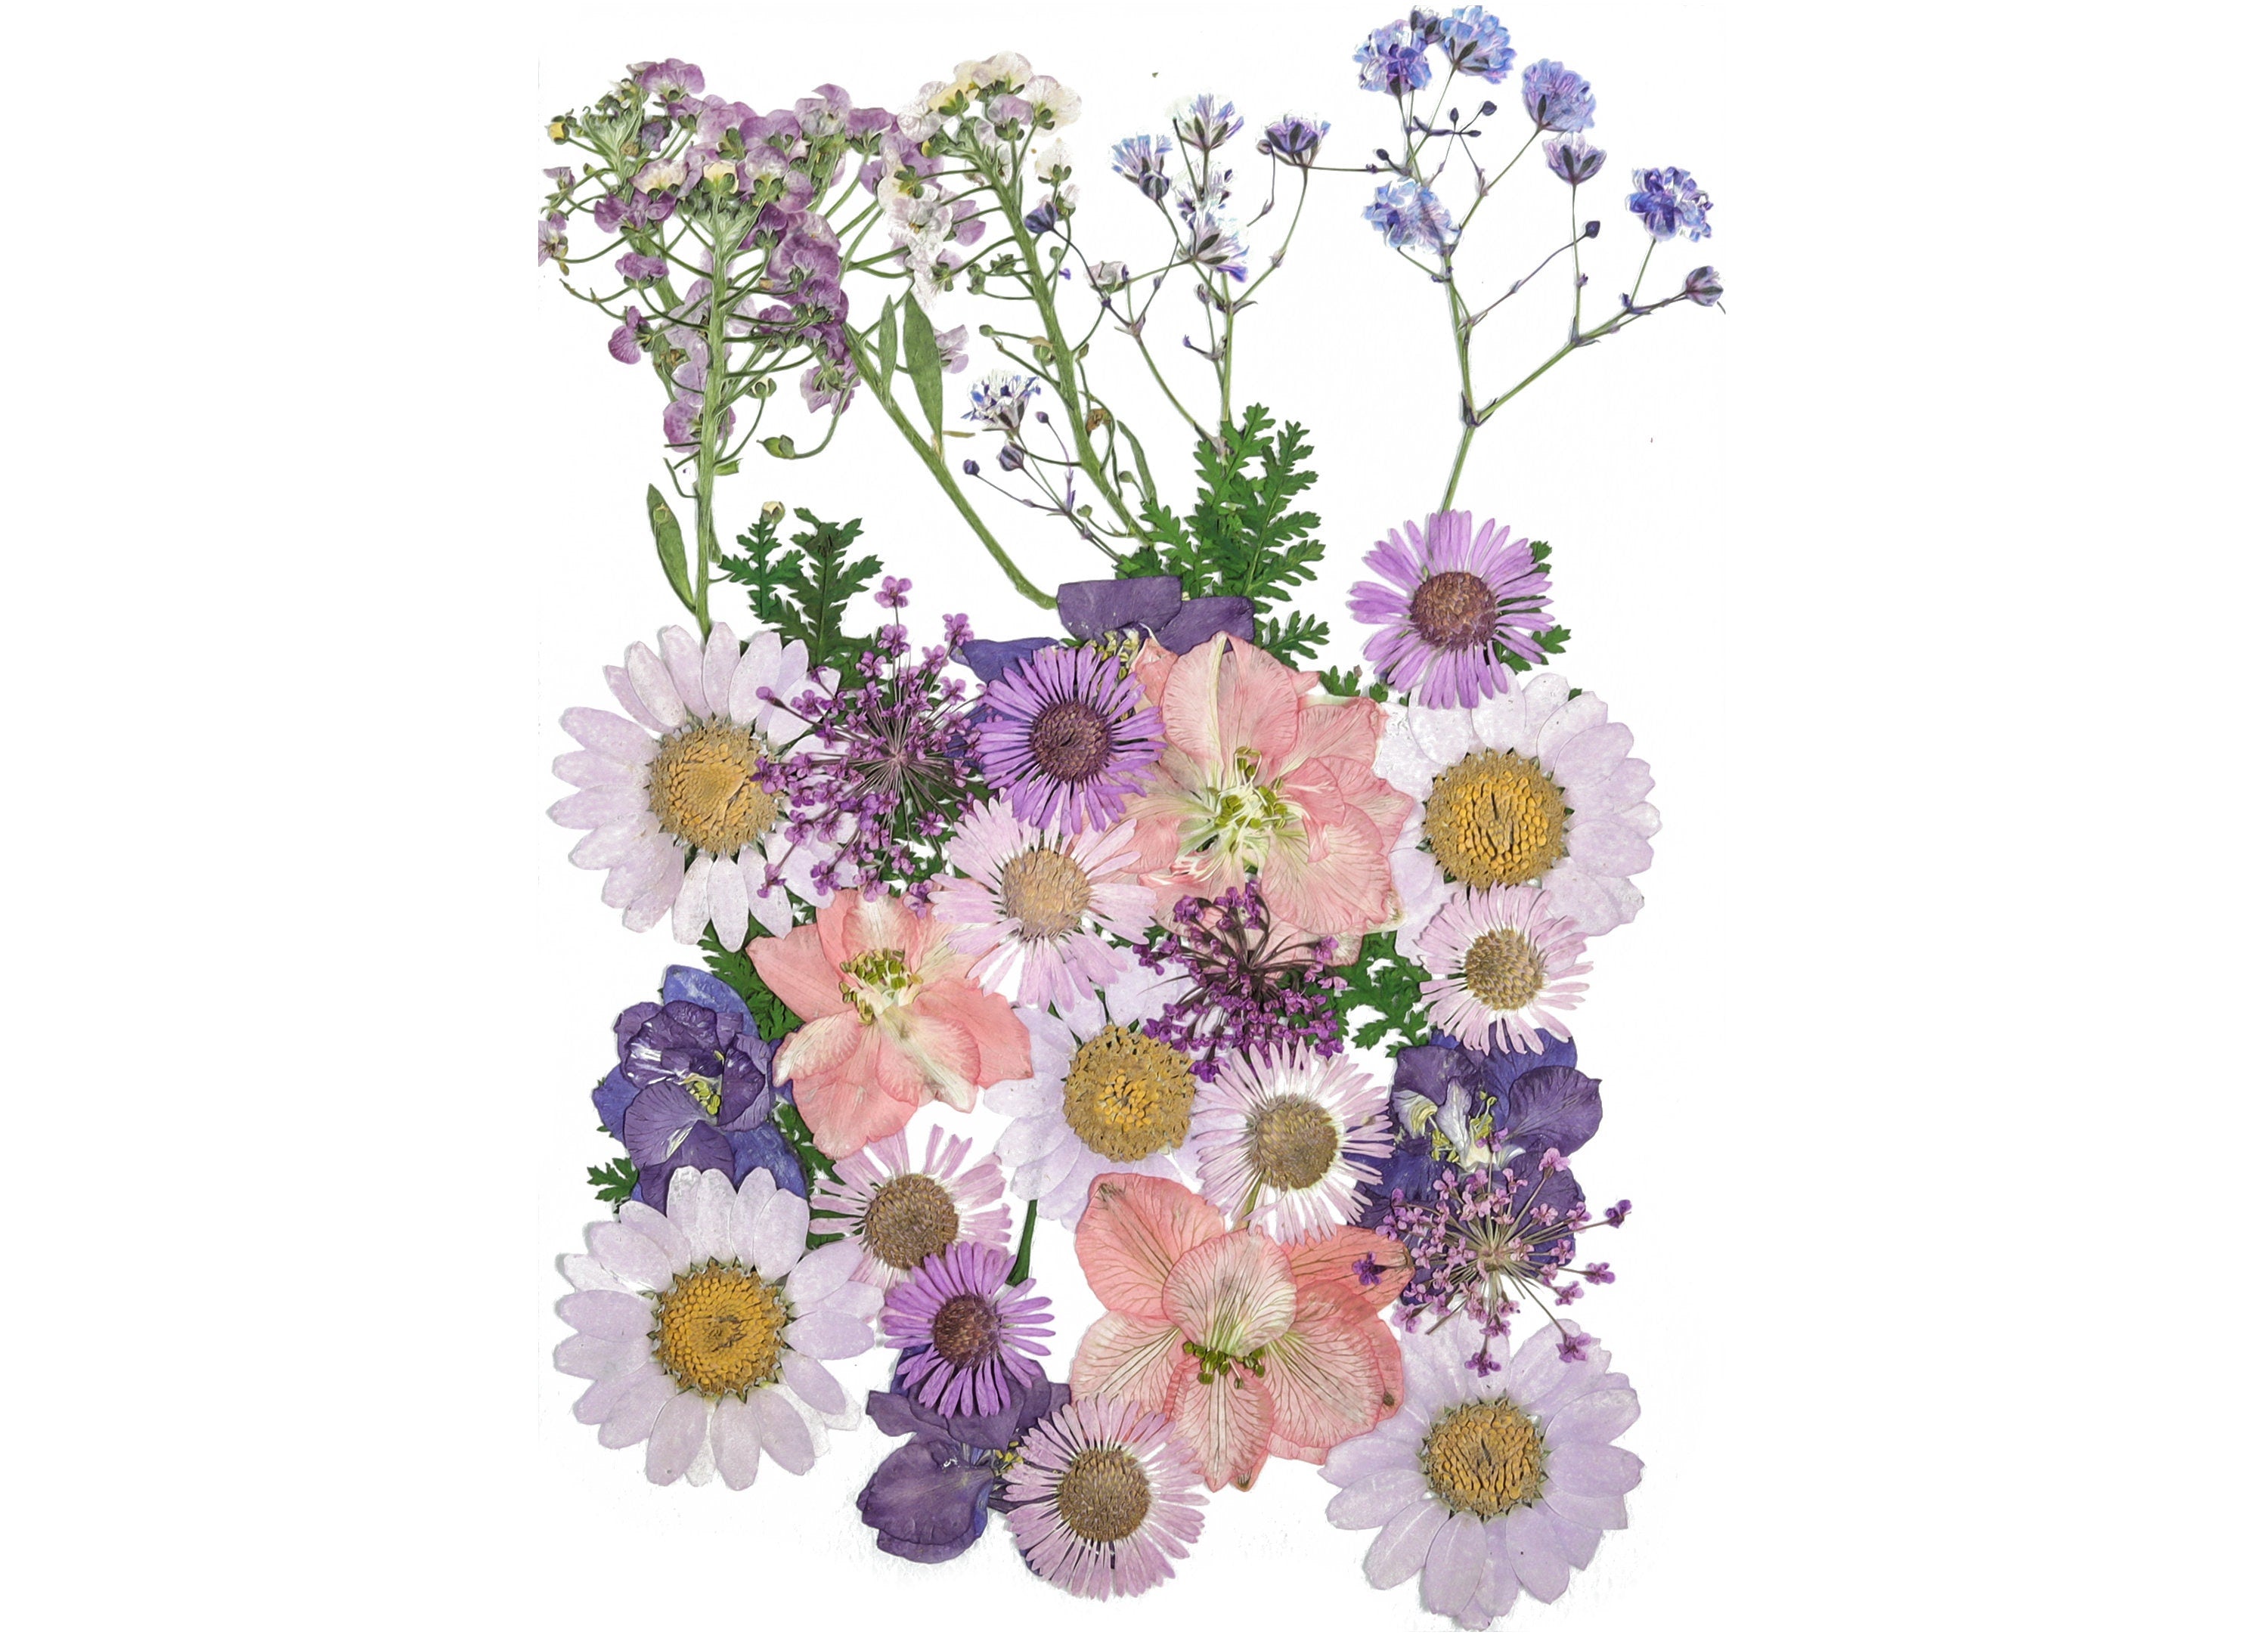 Mixed Dry Flowers, Dried Pressed Flowers for Crafts, Pressed